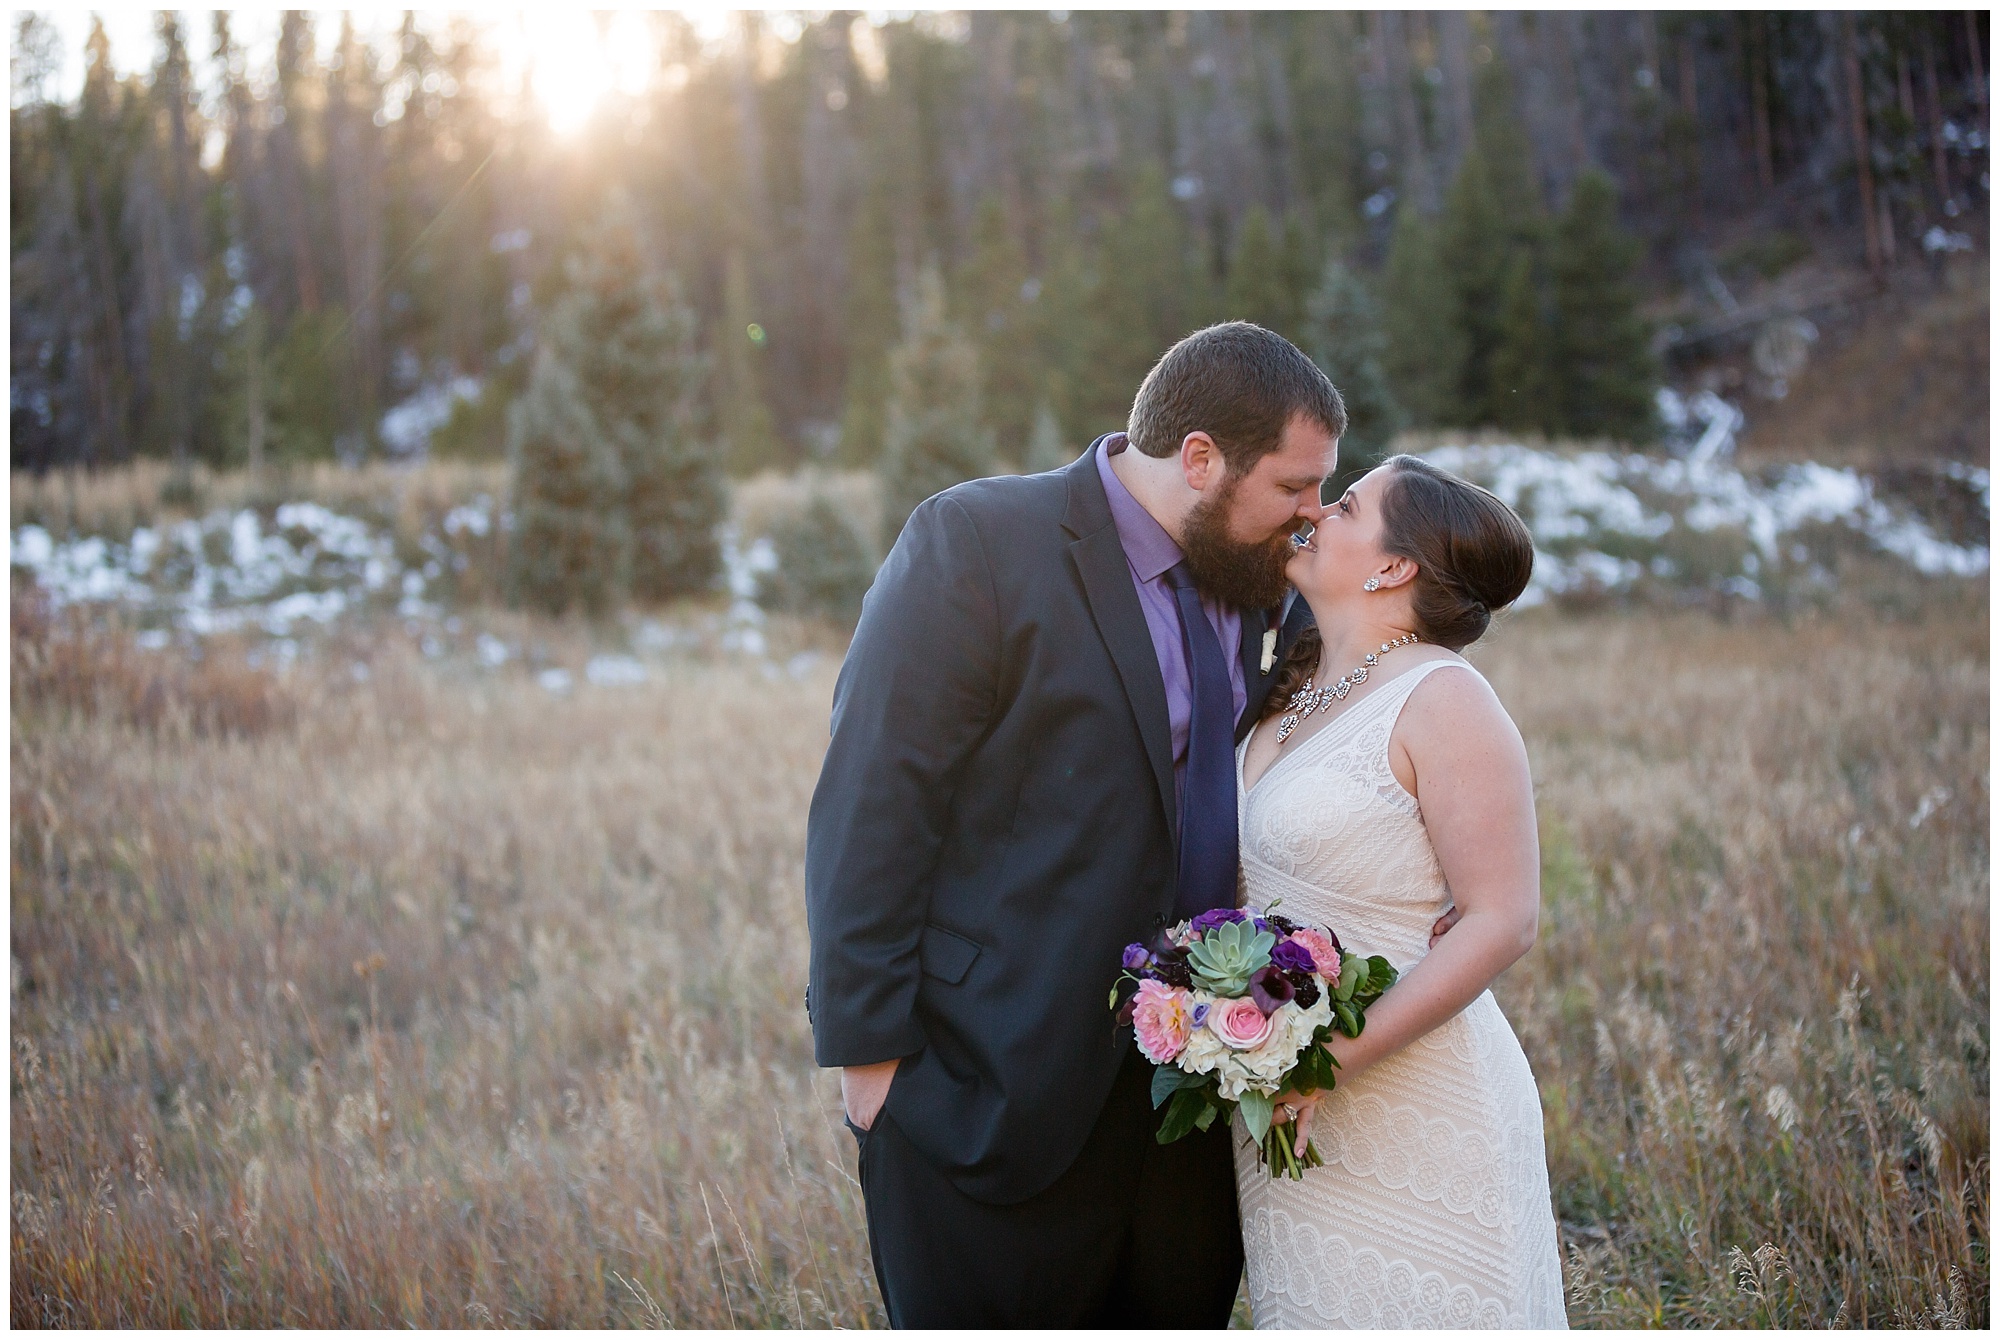 The bride and groom lean in for a kiss at their Colorado mountain elopement.